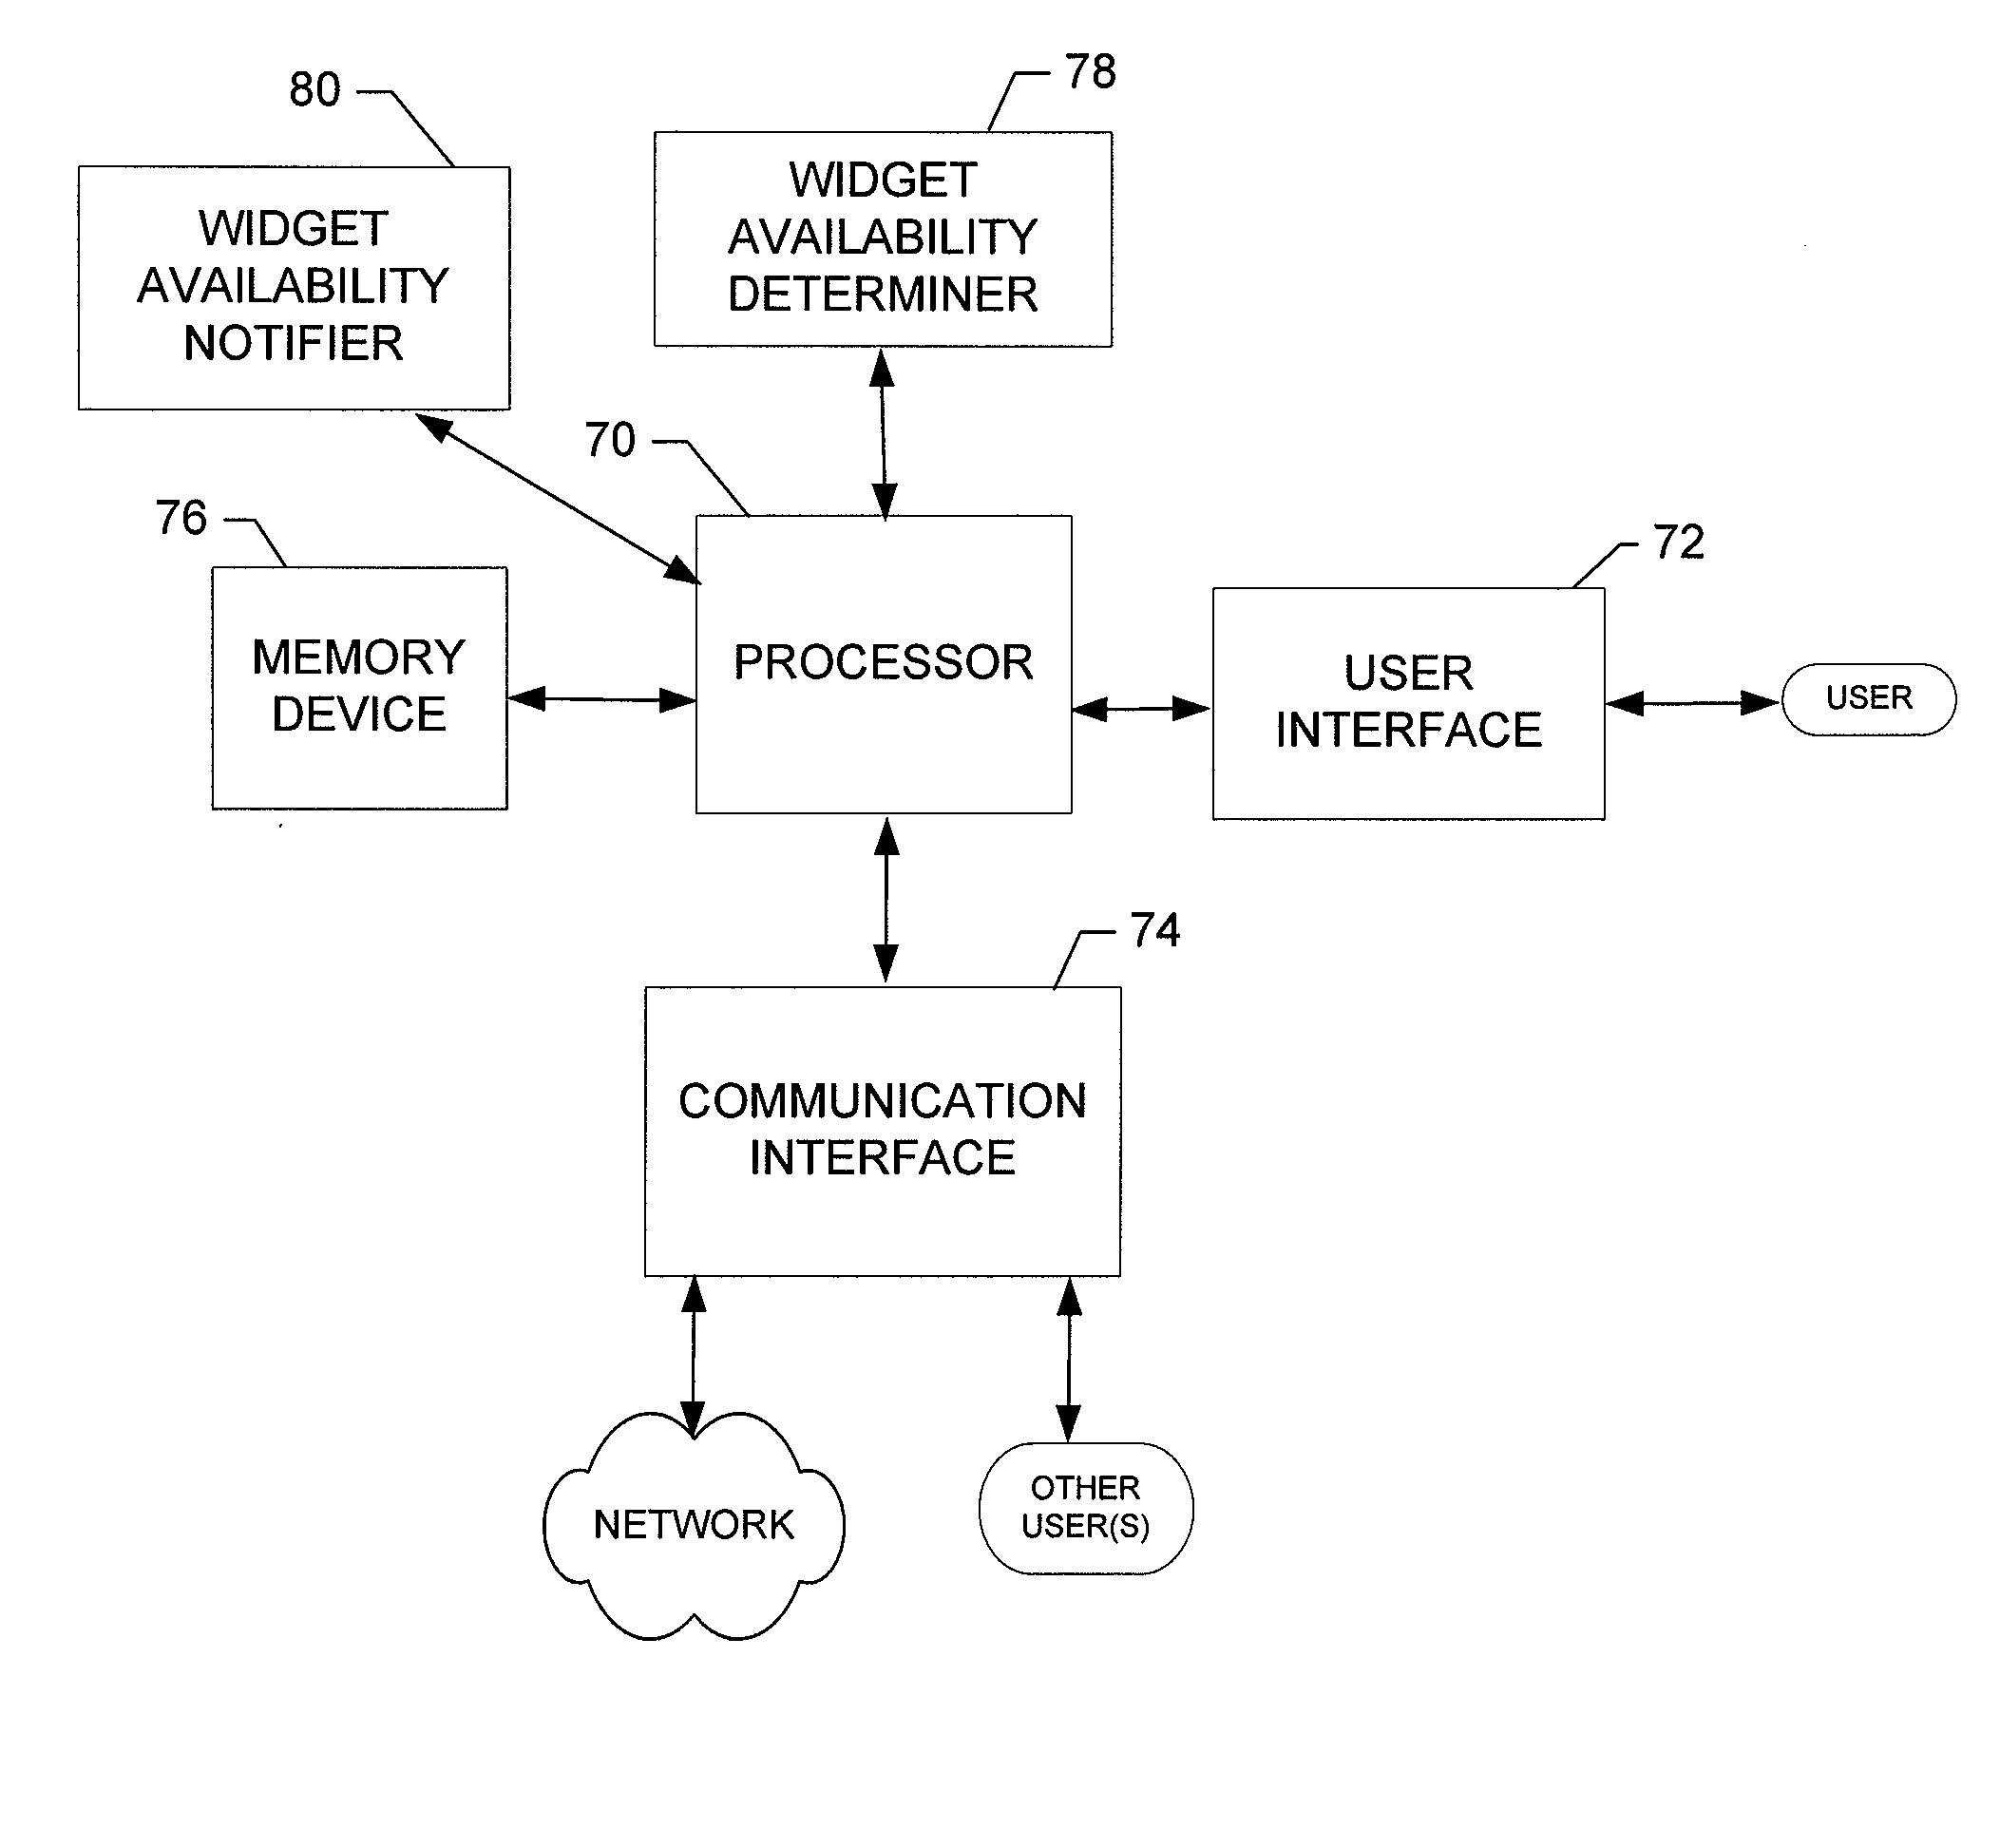 System, method, apparatus and computer program product for providing a notification of widget availability